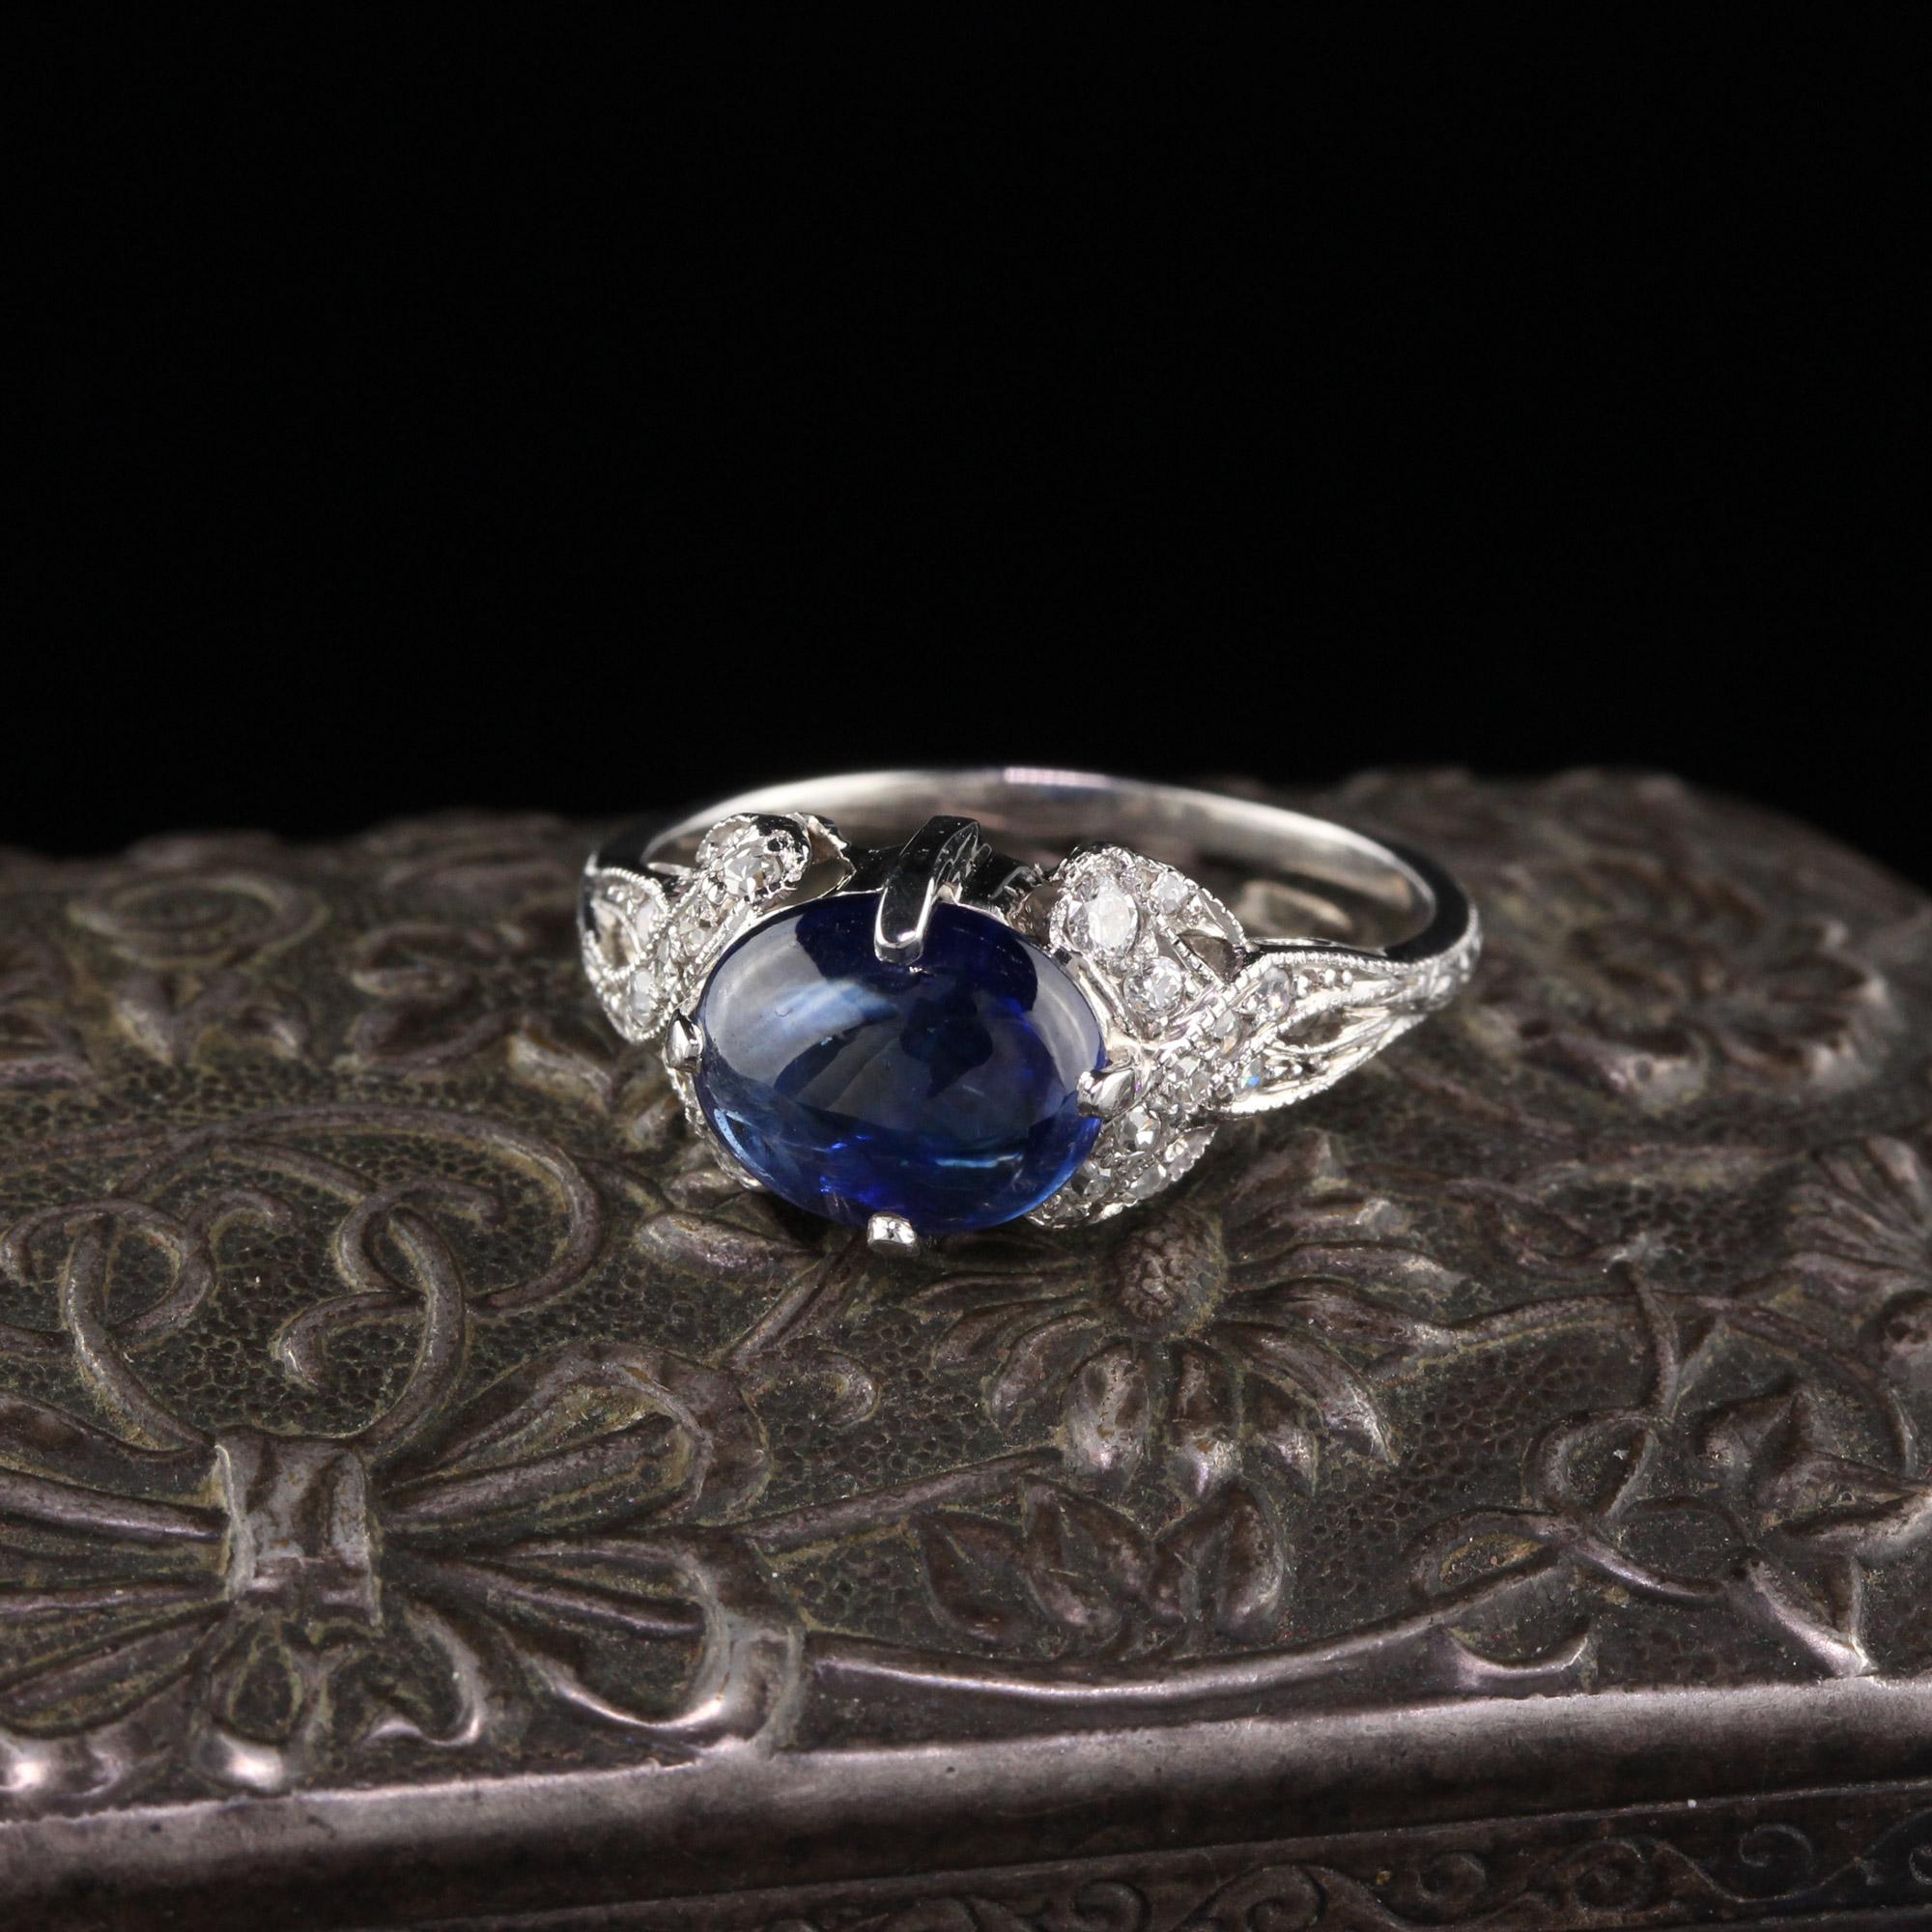 Beautiful Art Deco Platinum & Diamond Ring with an oval cabochon sapphire  set horizontally in the center. Small single cut diamonds create a beautiful design on either side of the sapphire center. In very good condition.

#R0306

Metal: